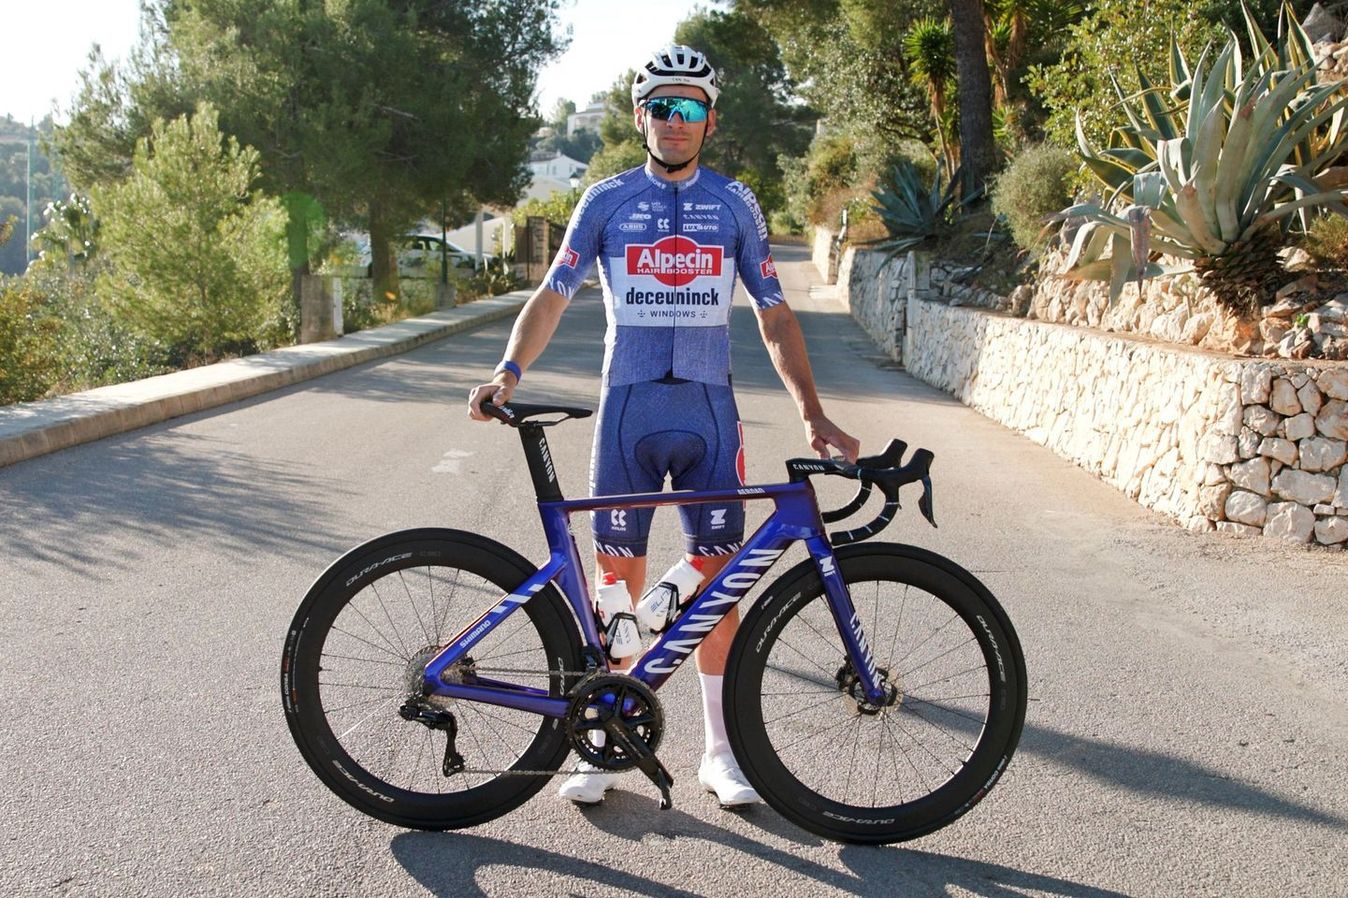 Alpecin-Deceuninck have a new double-denim kit but their Canyon bike remains the same